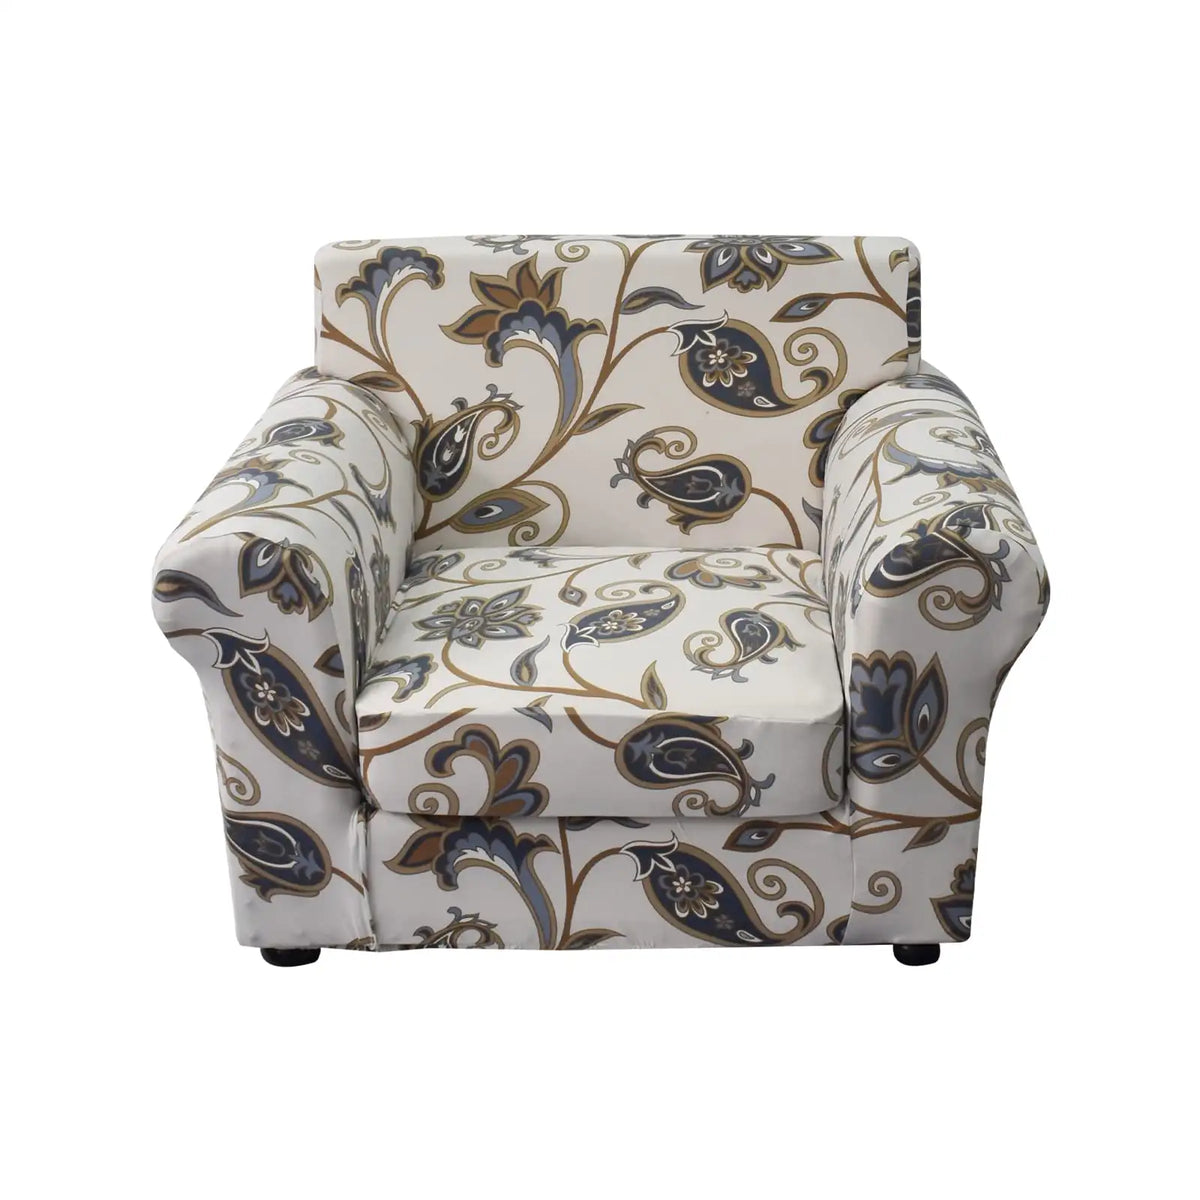 Floral Printed Sofa Cover Couch Slipcovers with 1/2/3 Seat Cushion Cover Crfatop %sku%